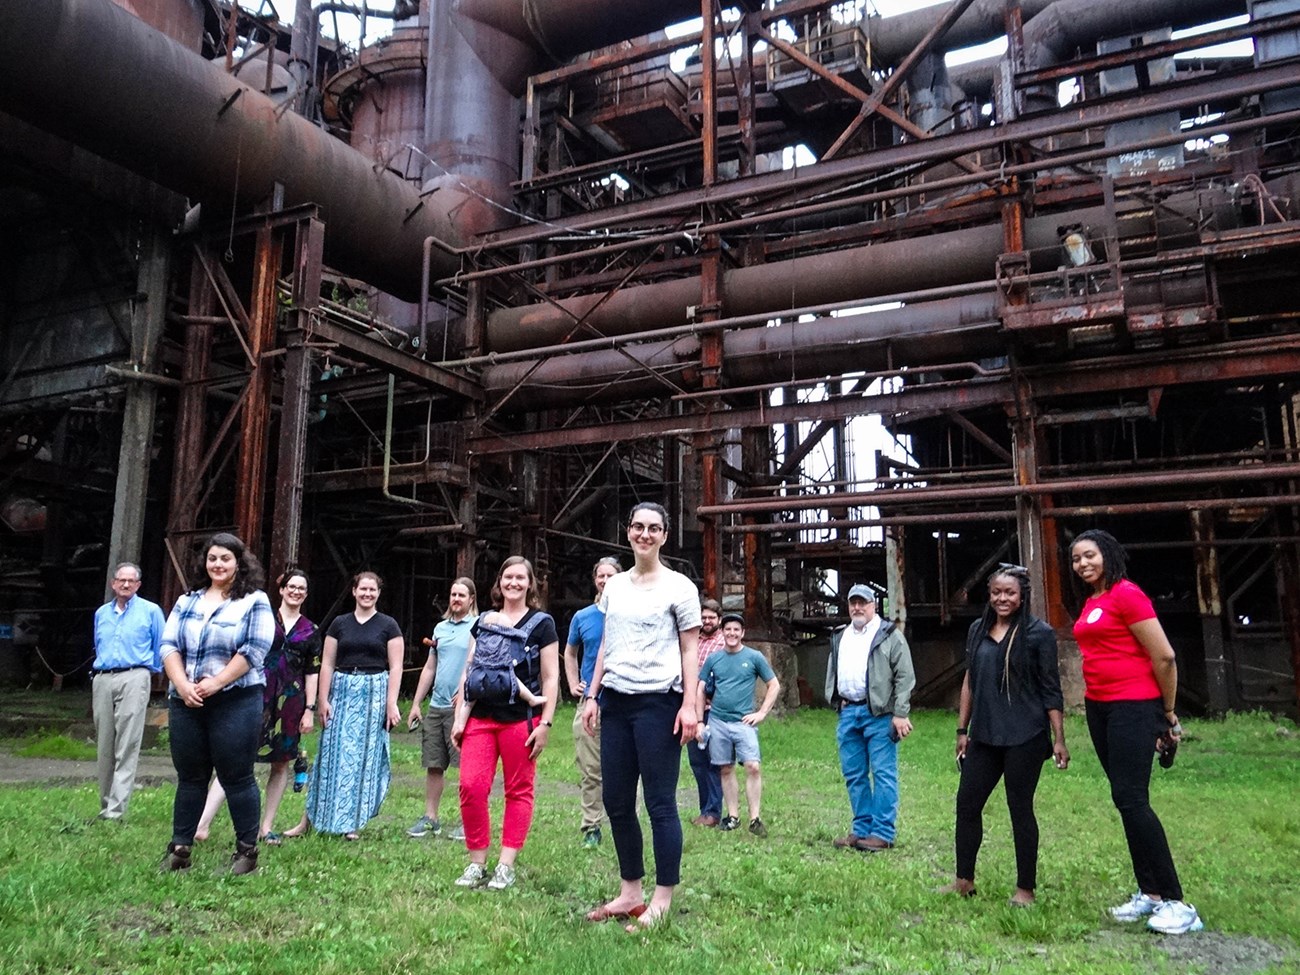 NHA workshop participants at Carrie Blast Furnaces in the Rivers of Steel NHA